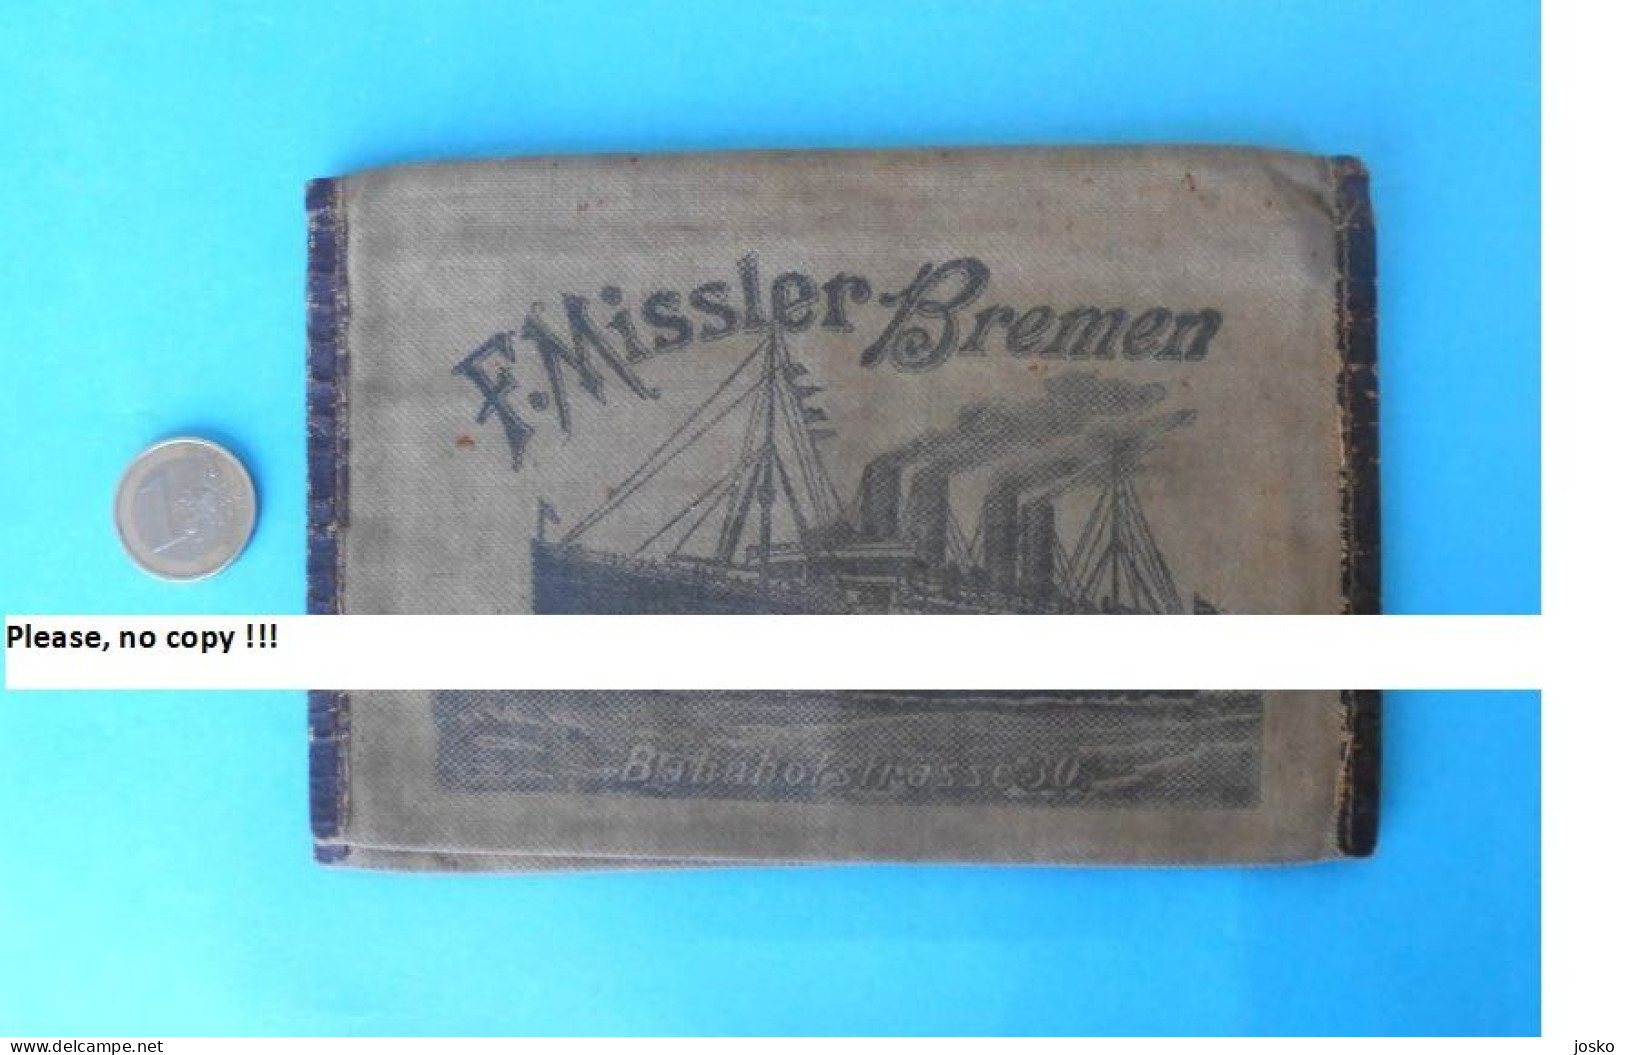 F. MISSLER - BREMEN Germany antique canvas emigrants ticket and passport wallet late 1800's & early 1900's * ship schiff